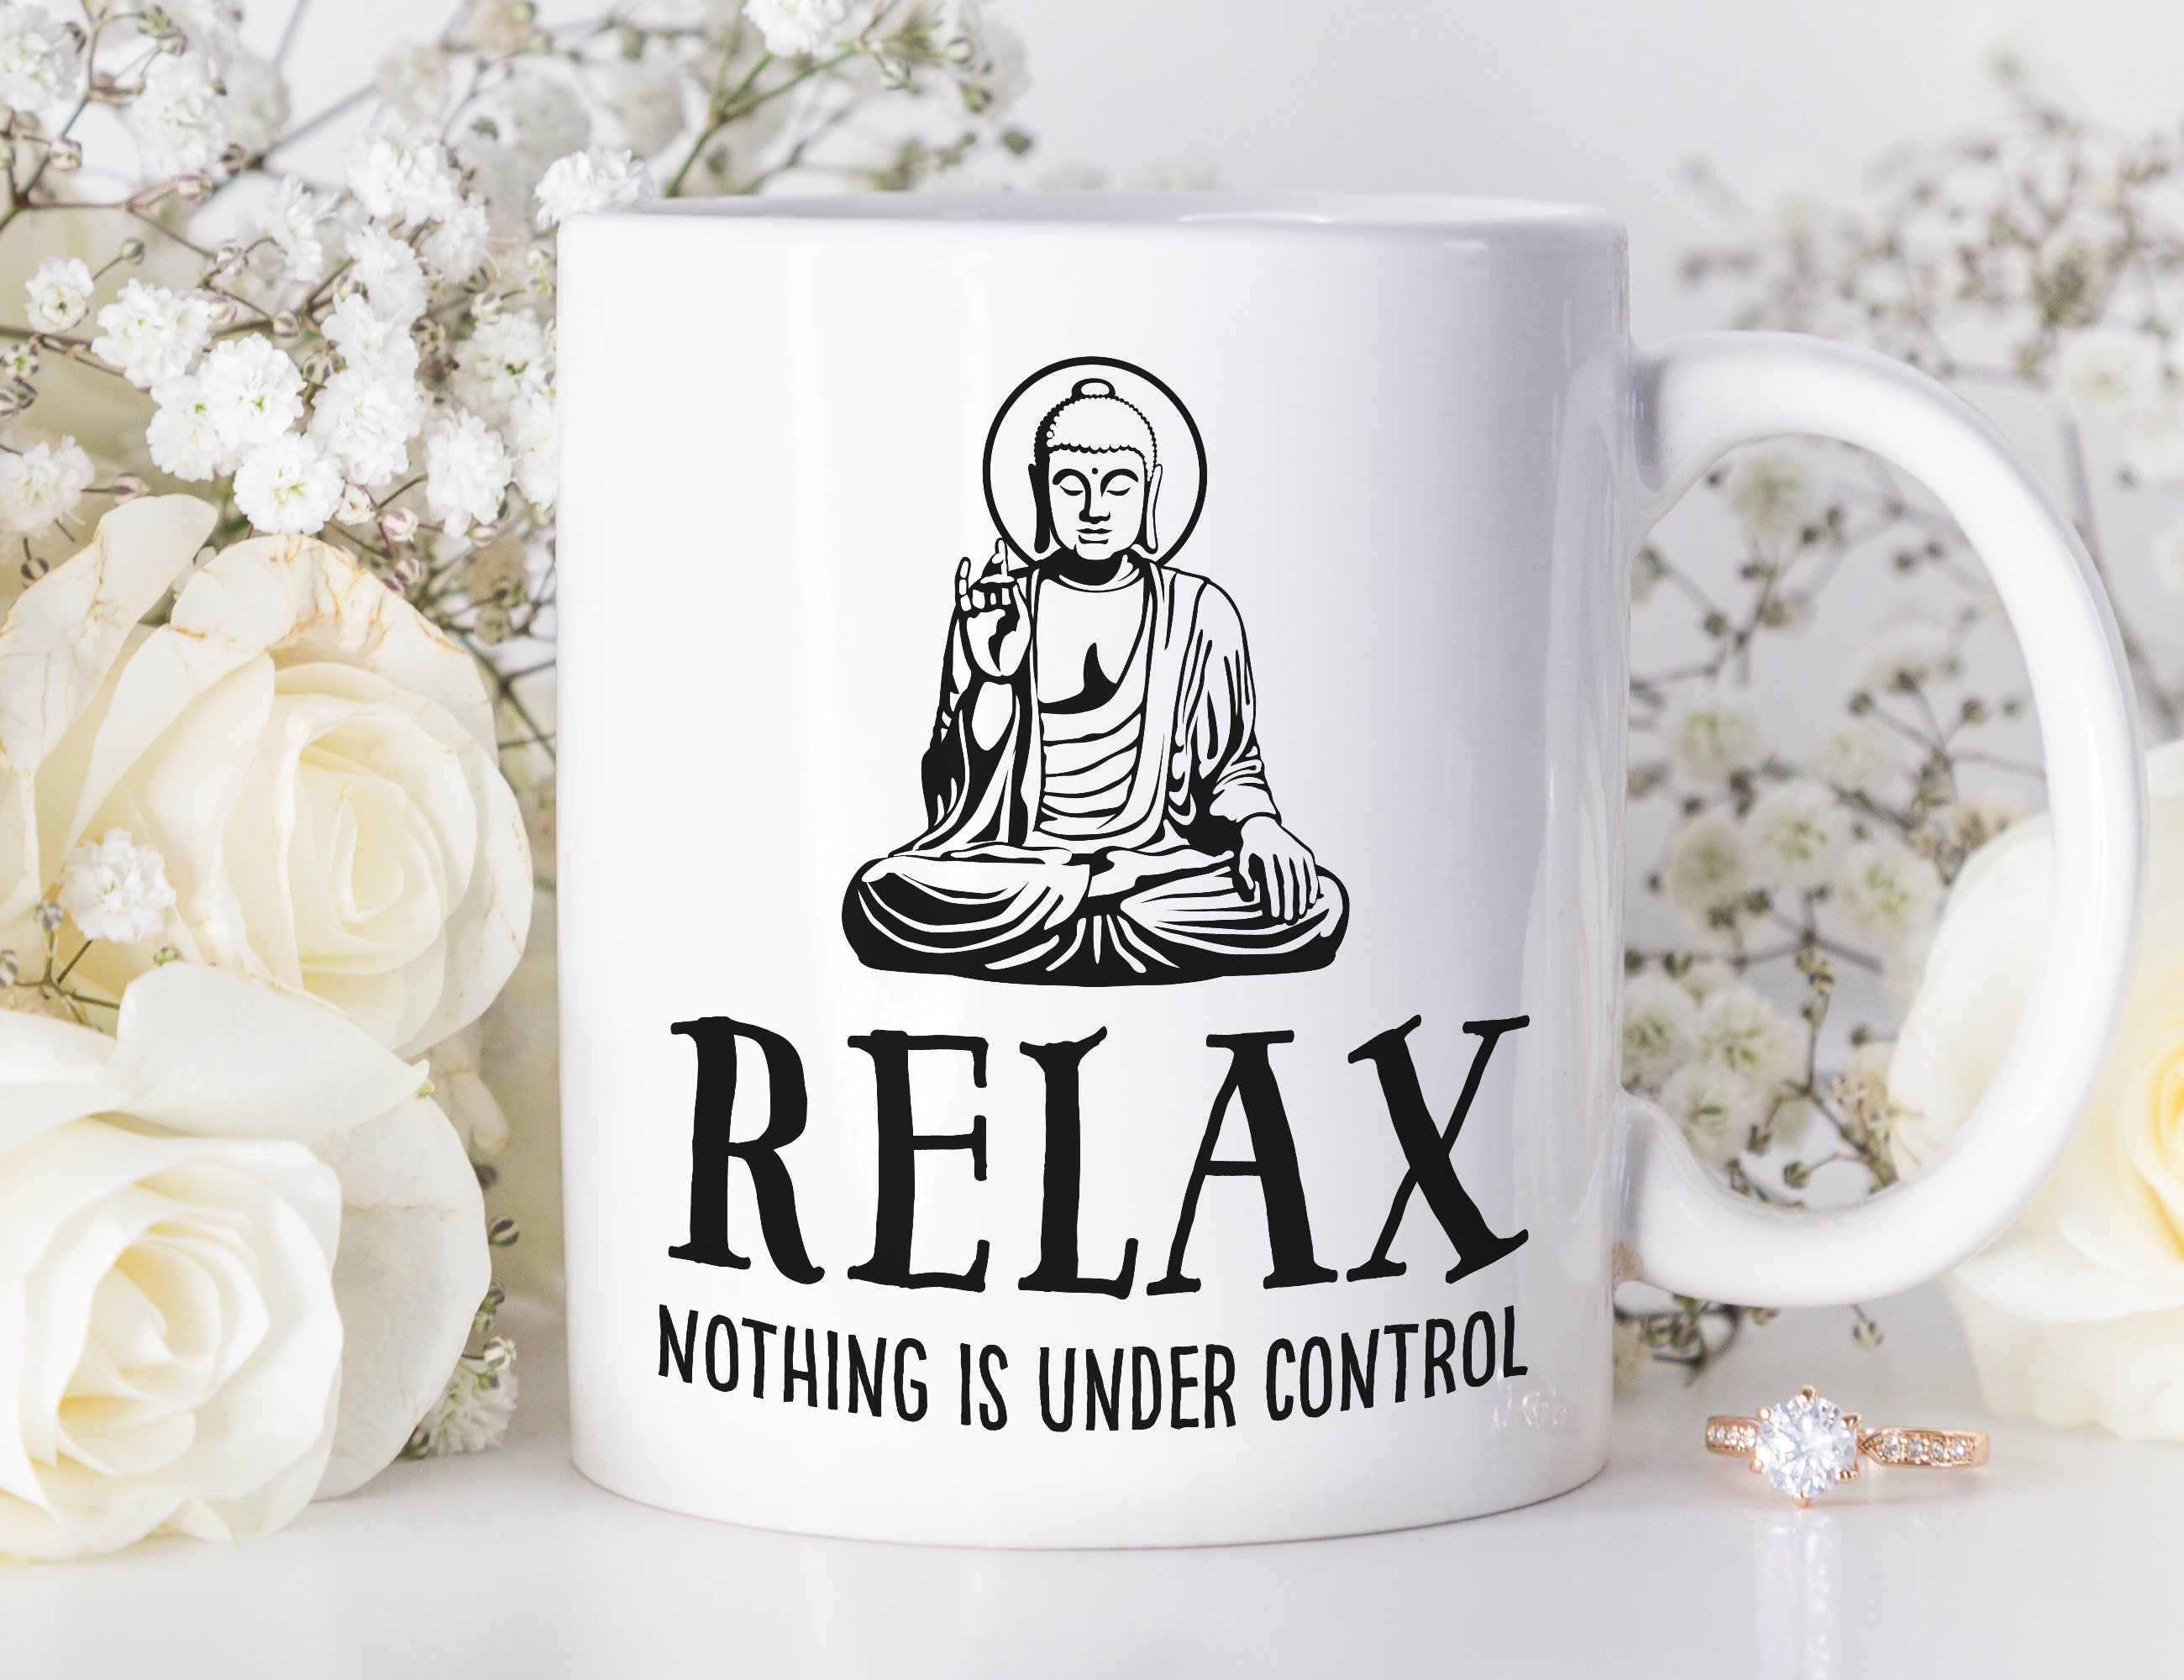 XXL Mug 28 Oz. Buddha: The Mind is Everything. What You Think You Become.